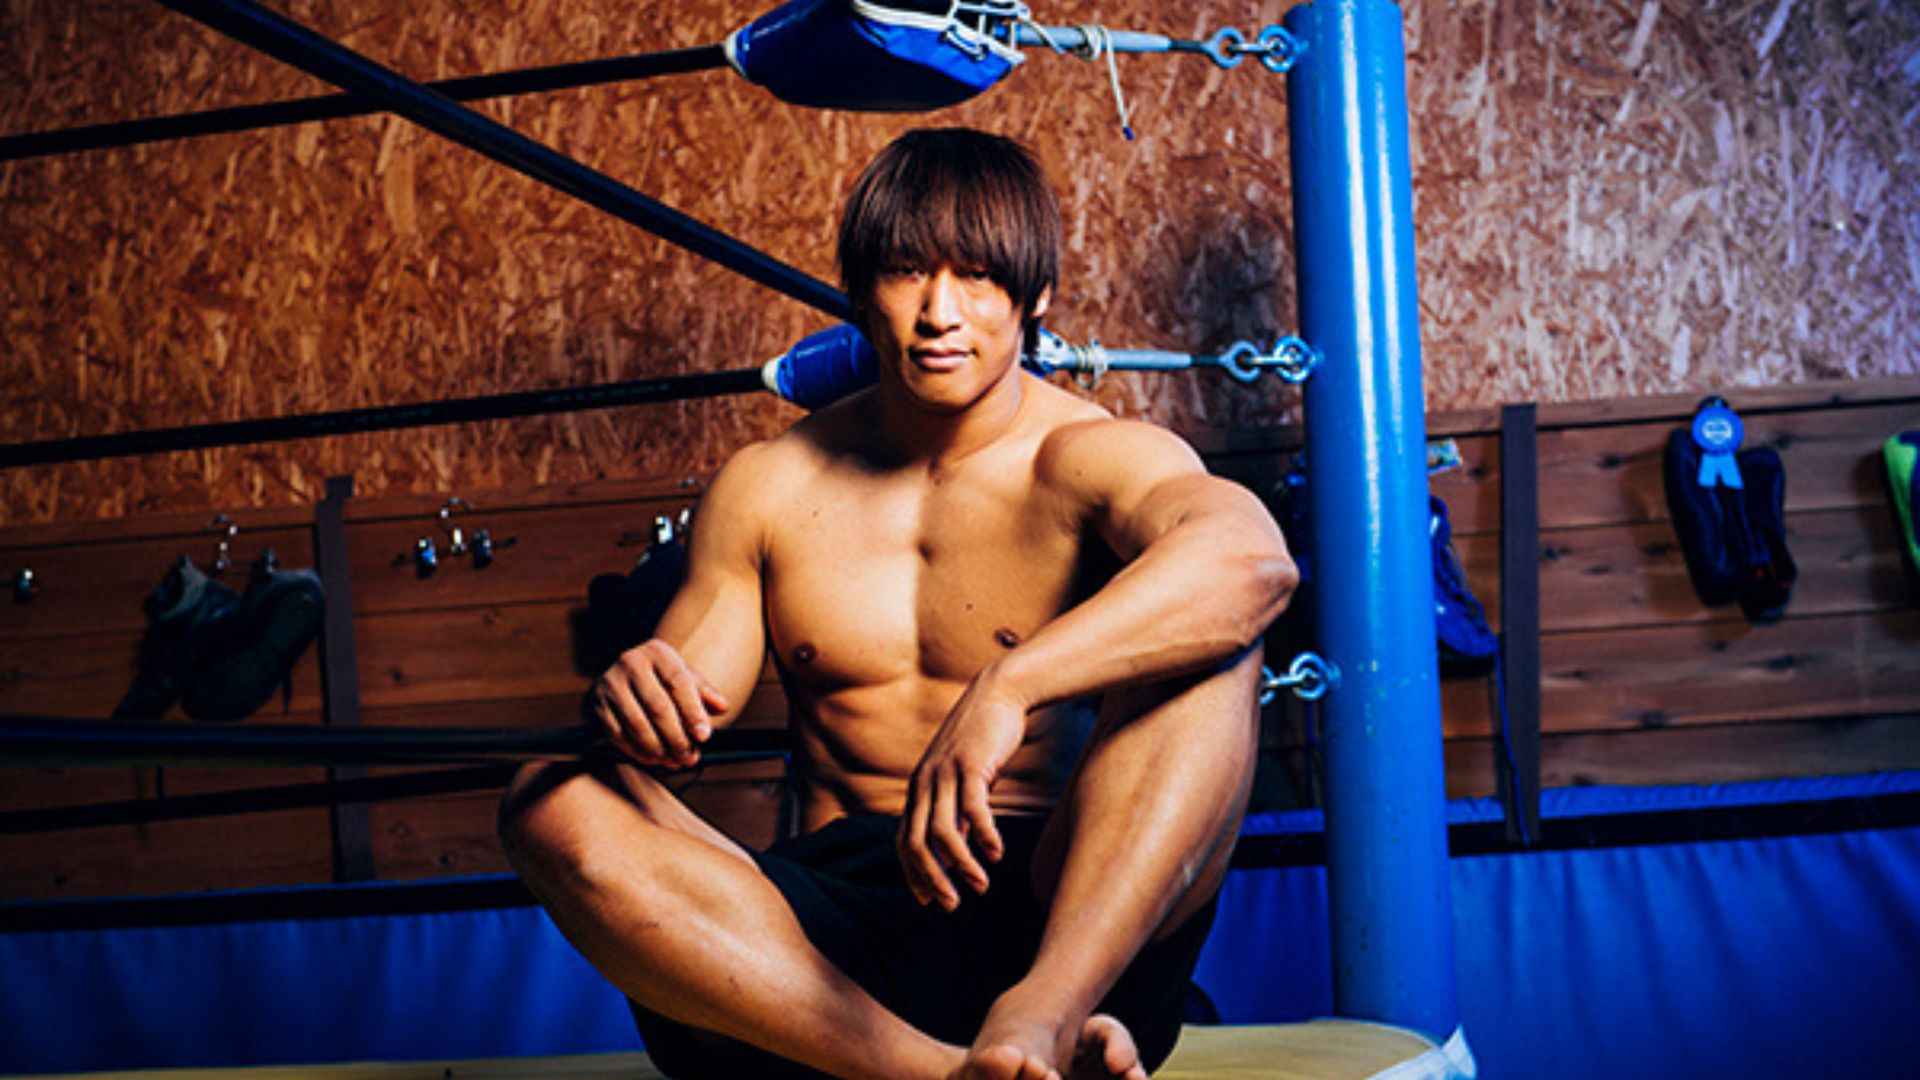 Is Kota Ibushi going to appear at AEW Dynamite for Blood and Guts?